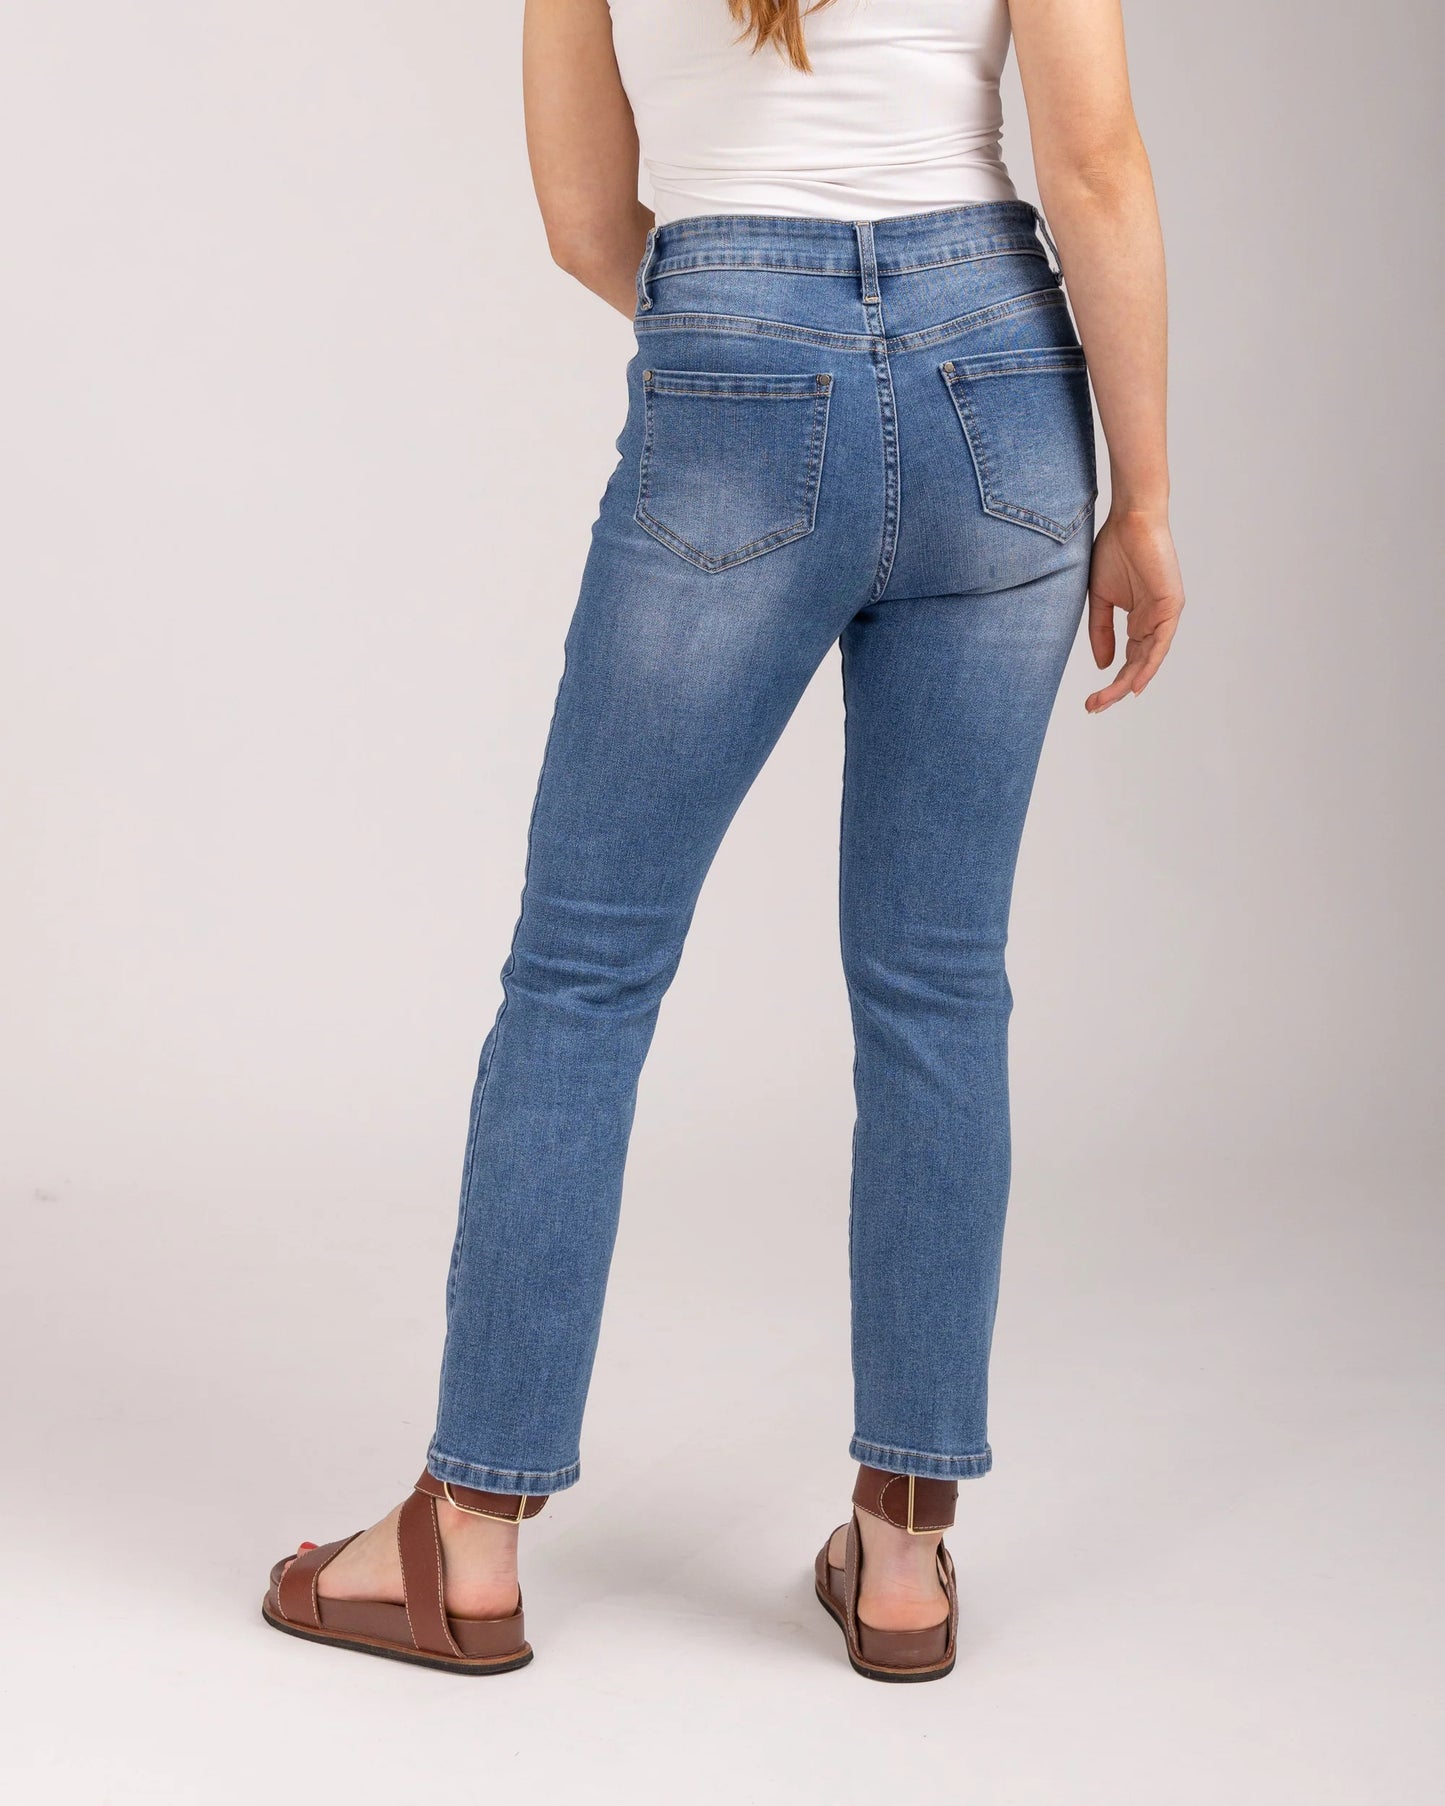 Mudflower - Cropped Jeans - 700